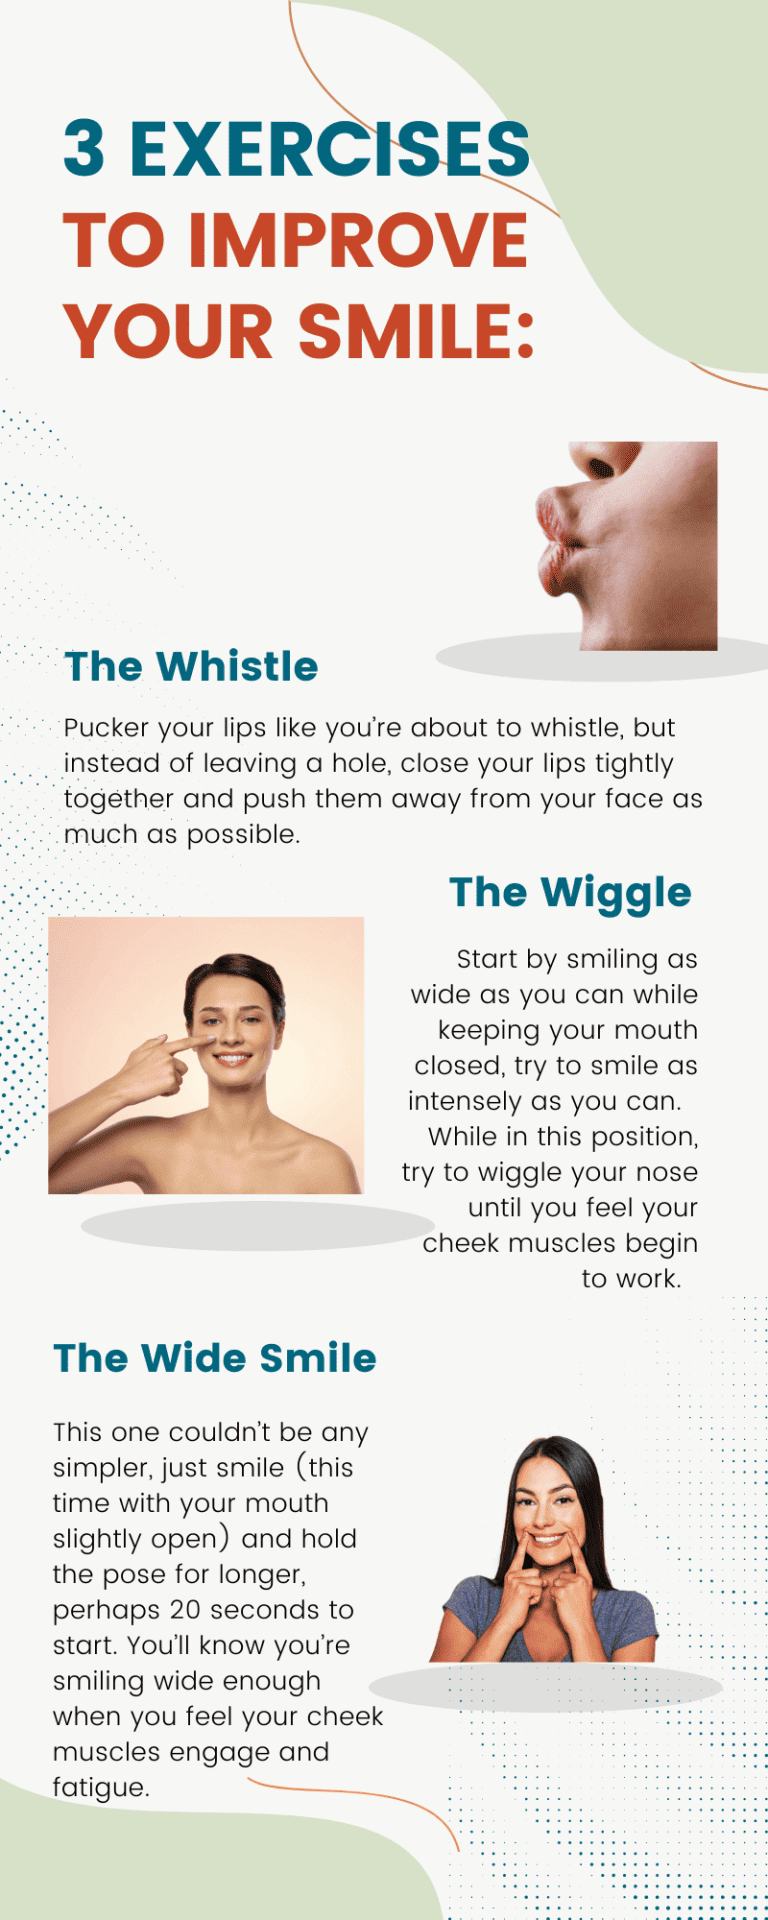 3 exercises to improve your smile.